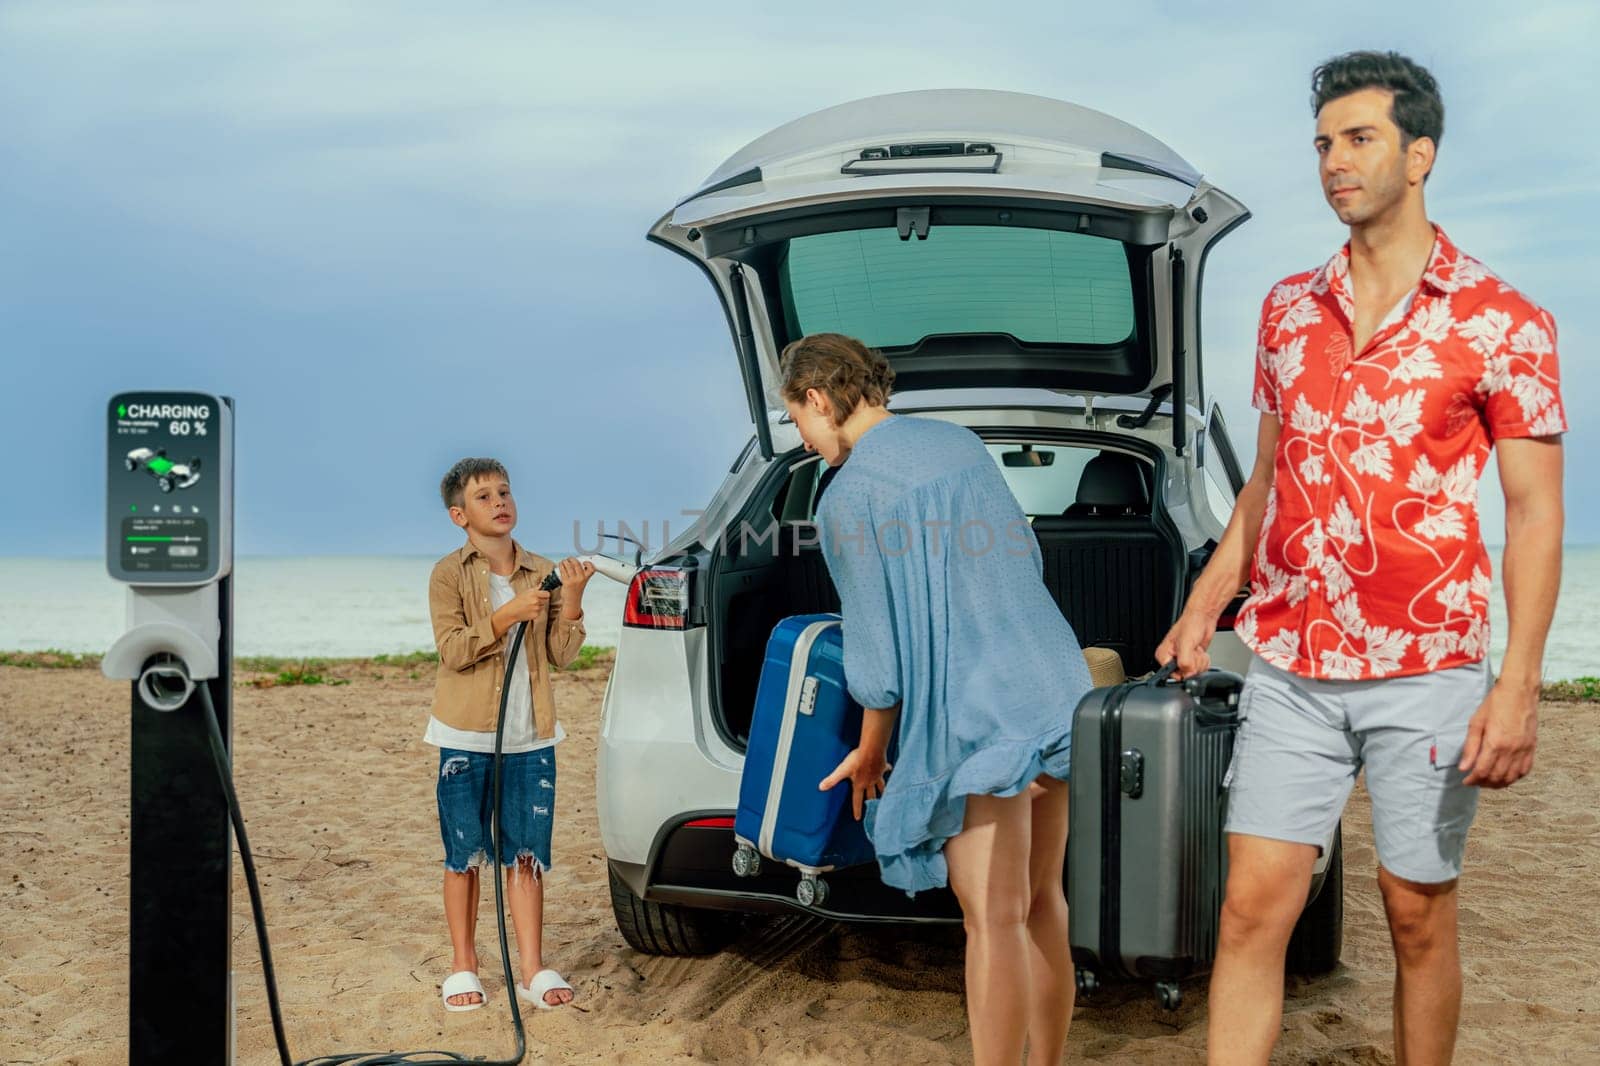 Family vacation trip traveling by the beach with electric car, lovely family taking luggage out while charging EV car battery with clean energy. Alternative family travel by eco-friendly car.Perpetual